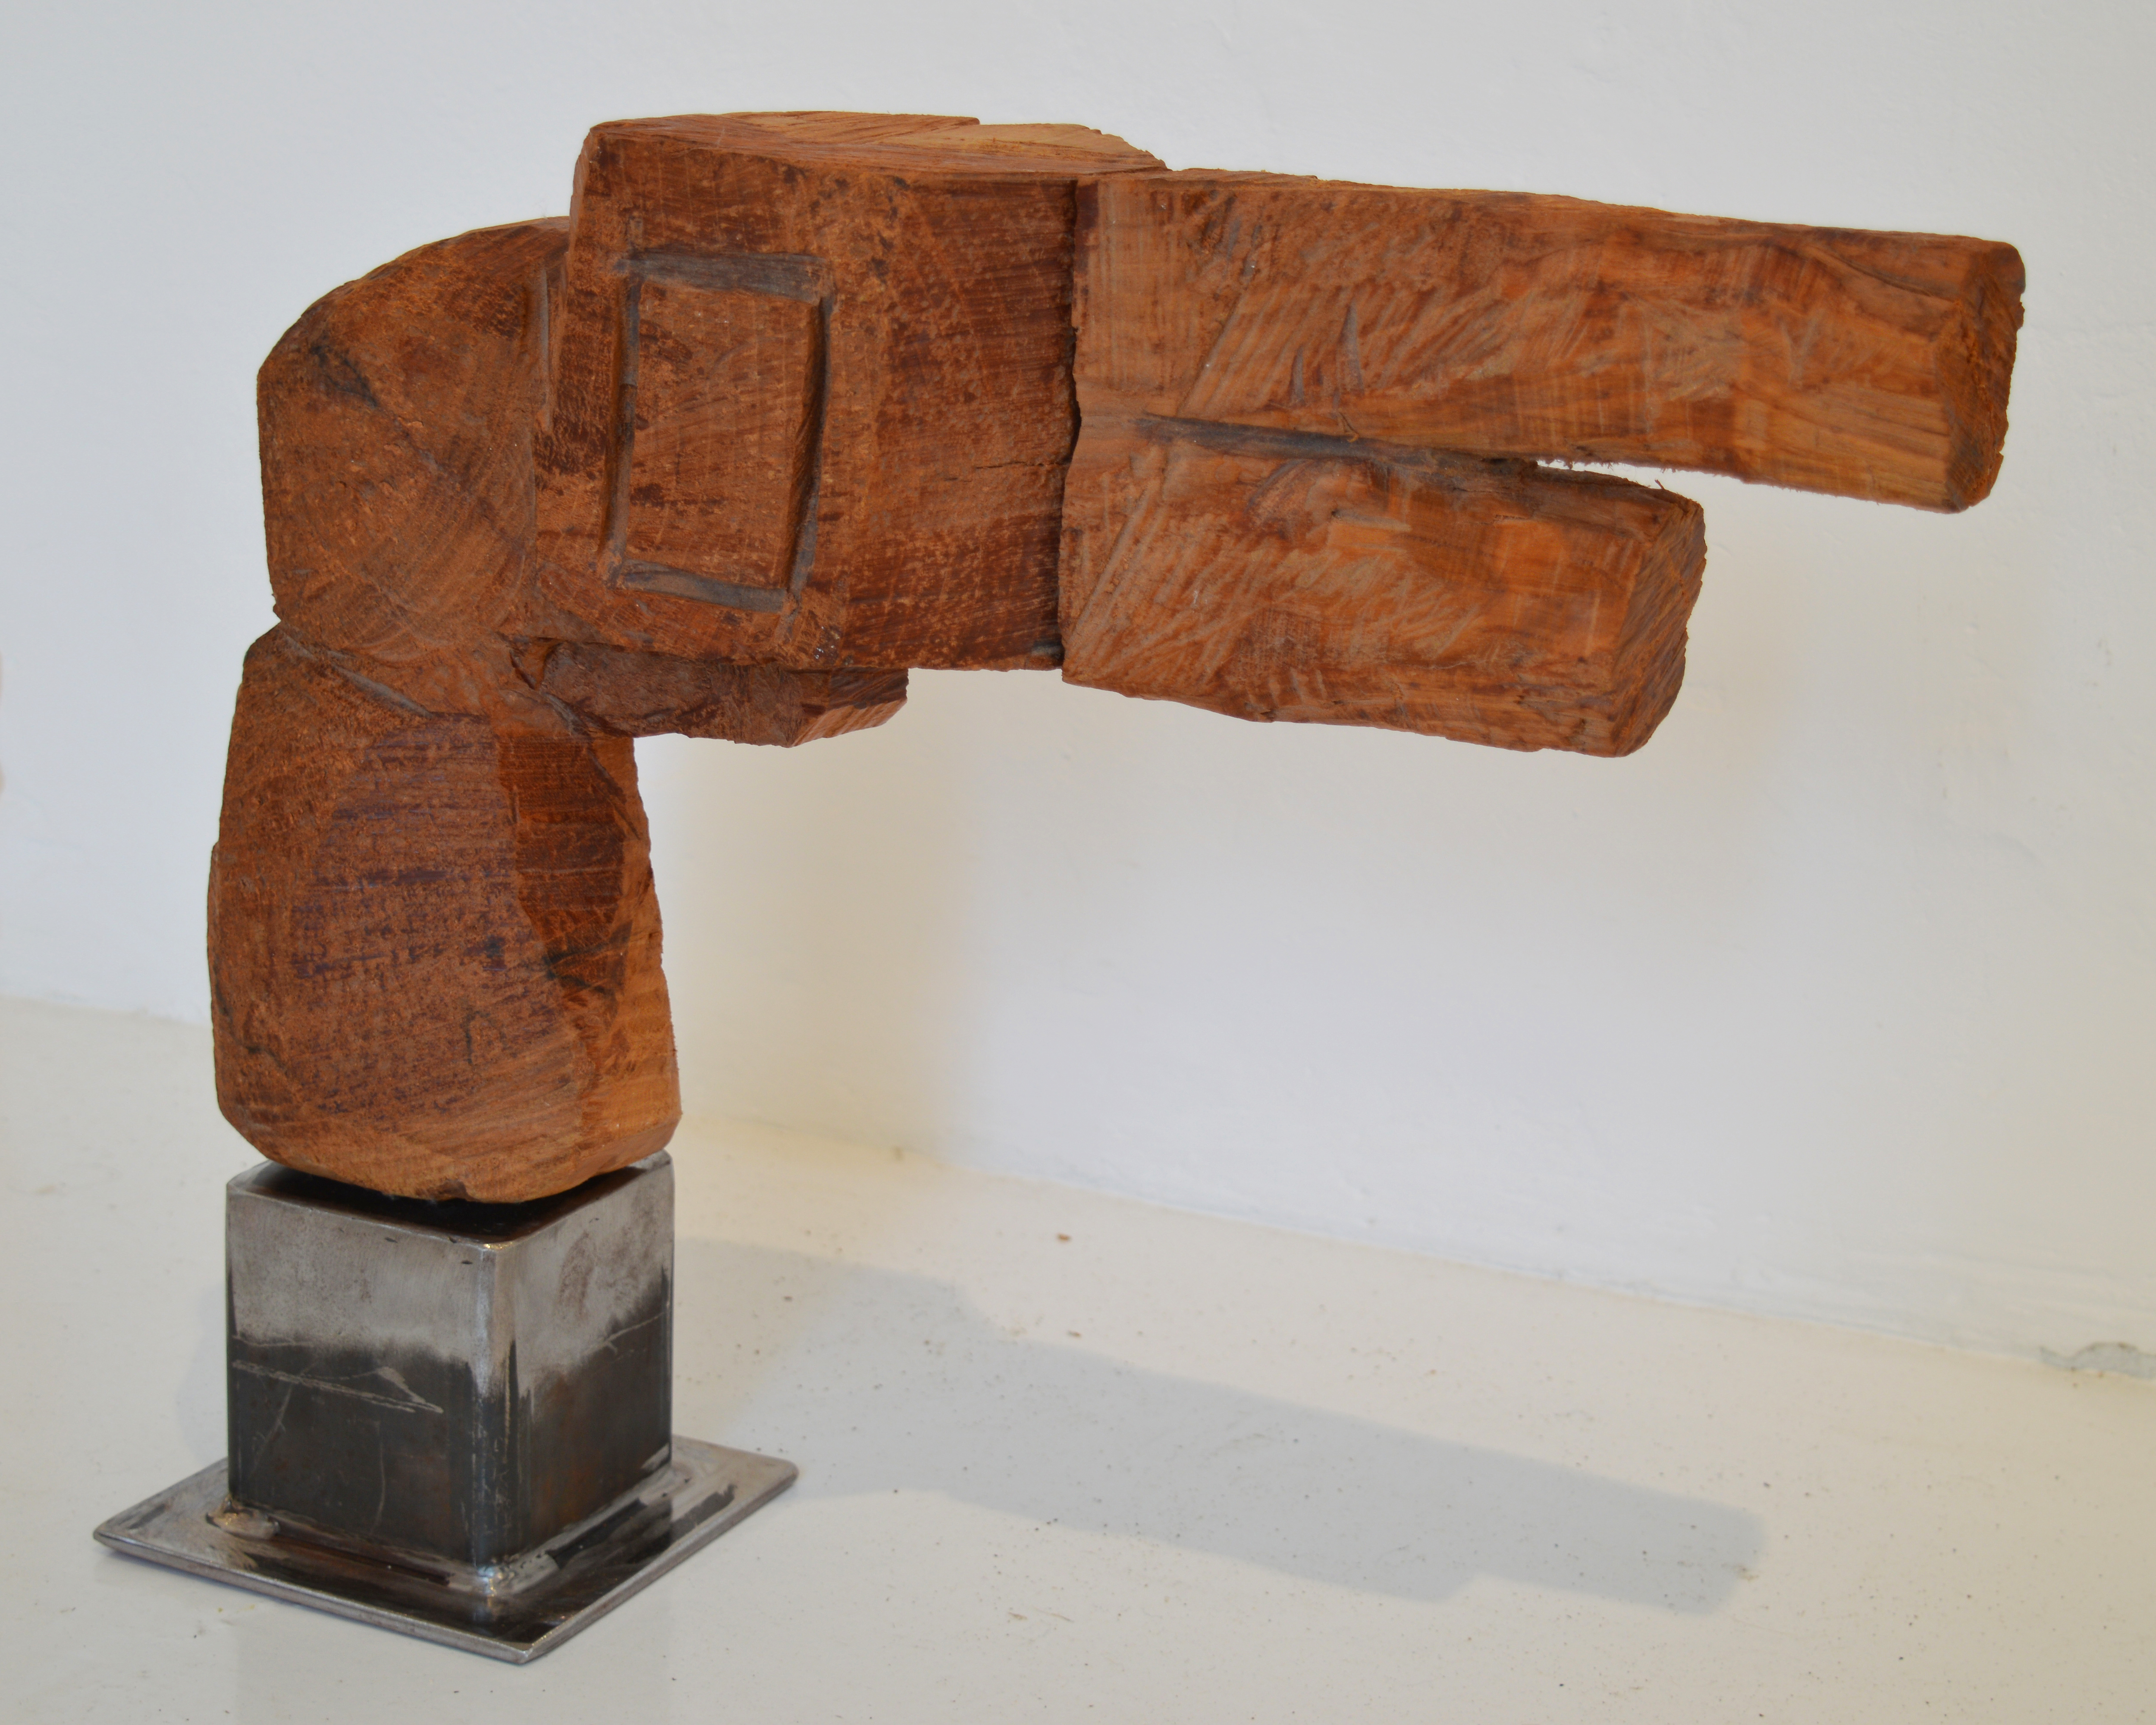 carved cherry wood with iron pedest, 35 x 46 x 12 cms. 2014